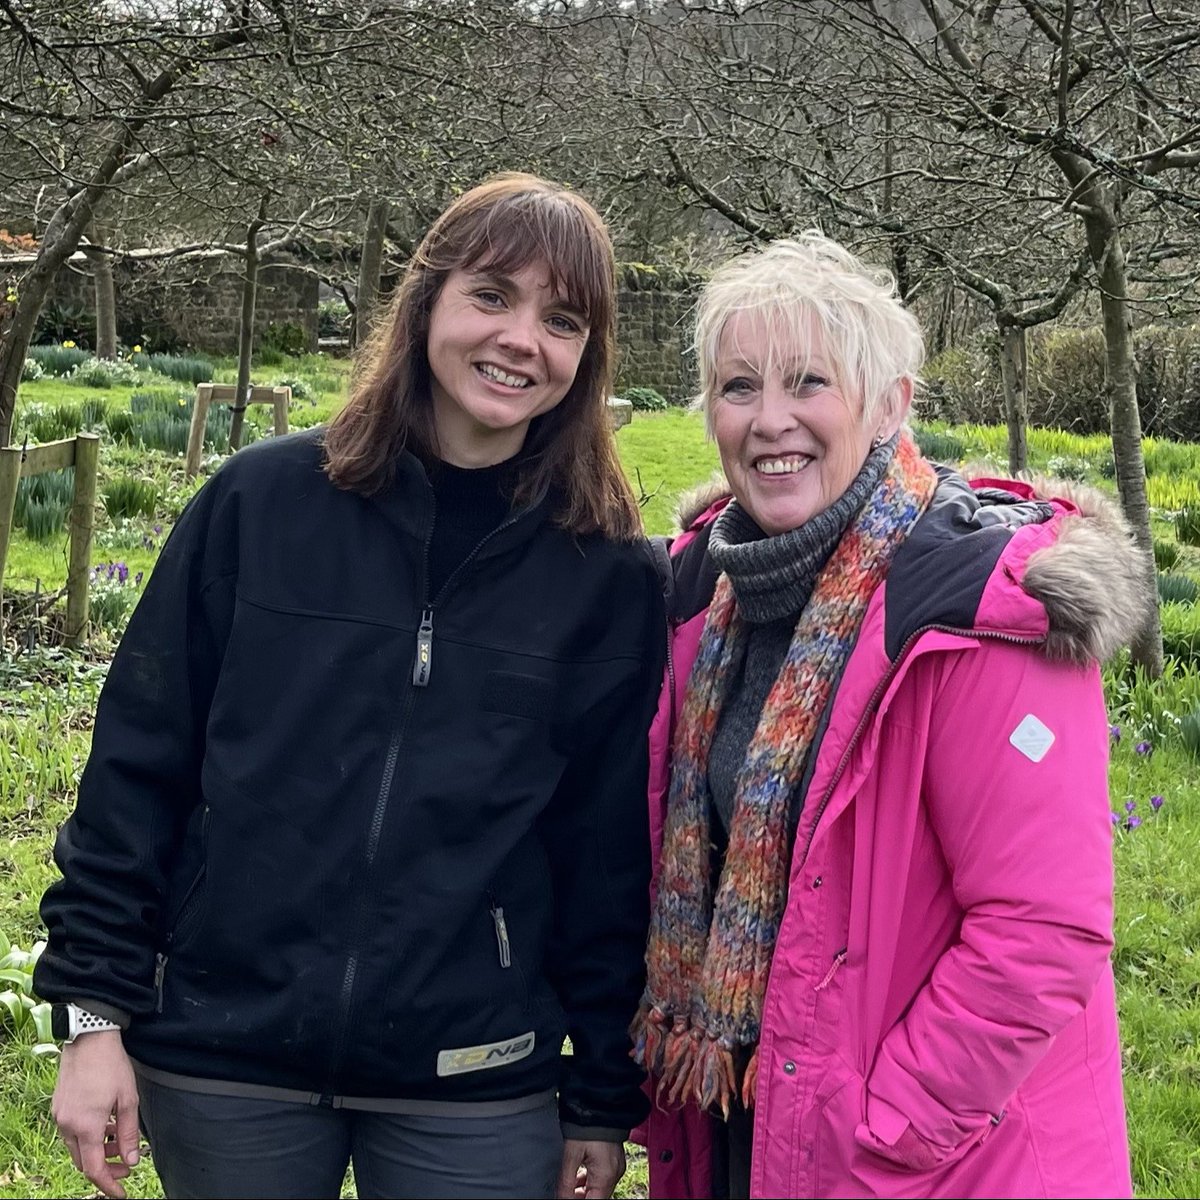 RHS Practical Horticulture student, Emilie Spurgeon recently had the exciting opportunity to meet renowned TV gardener Carol Klein from Gardener's World! Read more here: hubs.ly/Q02nGRB80